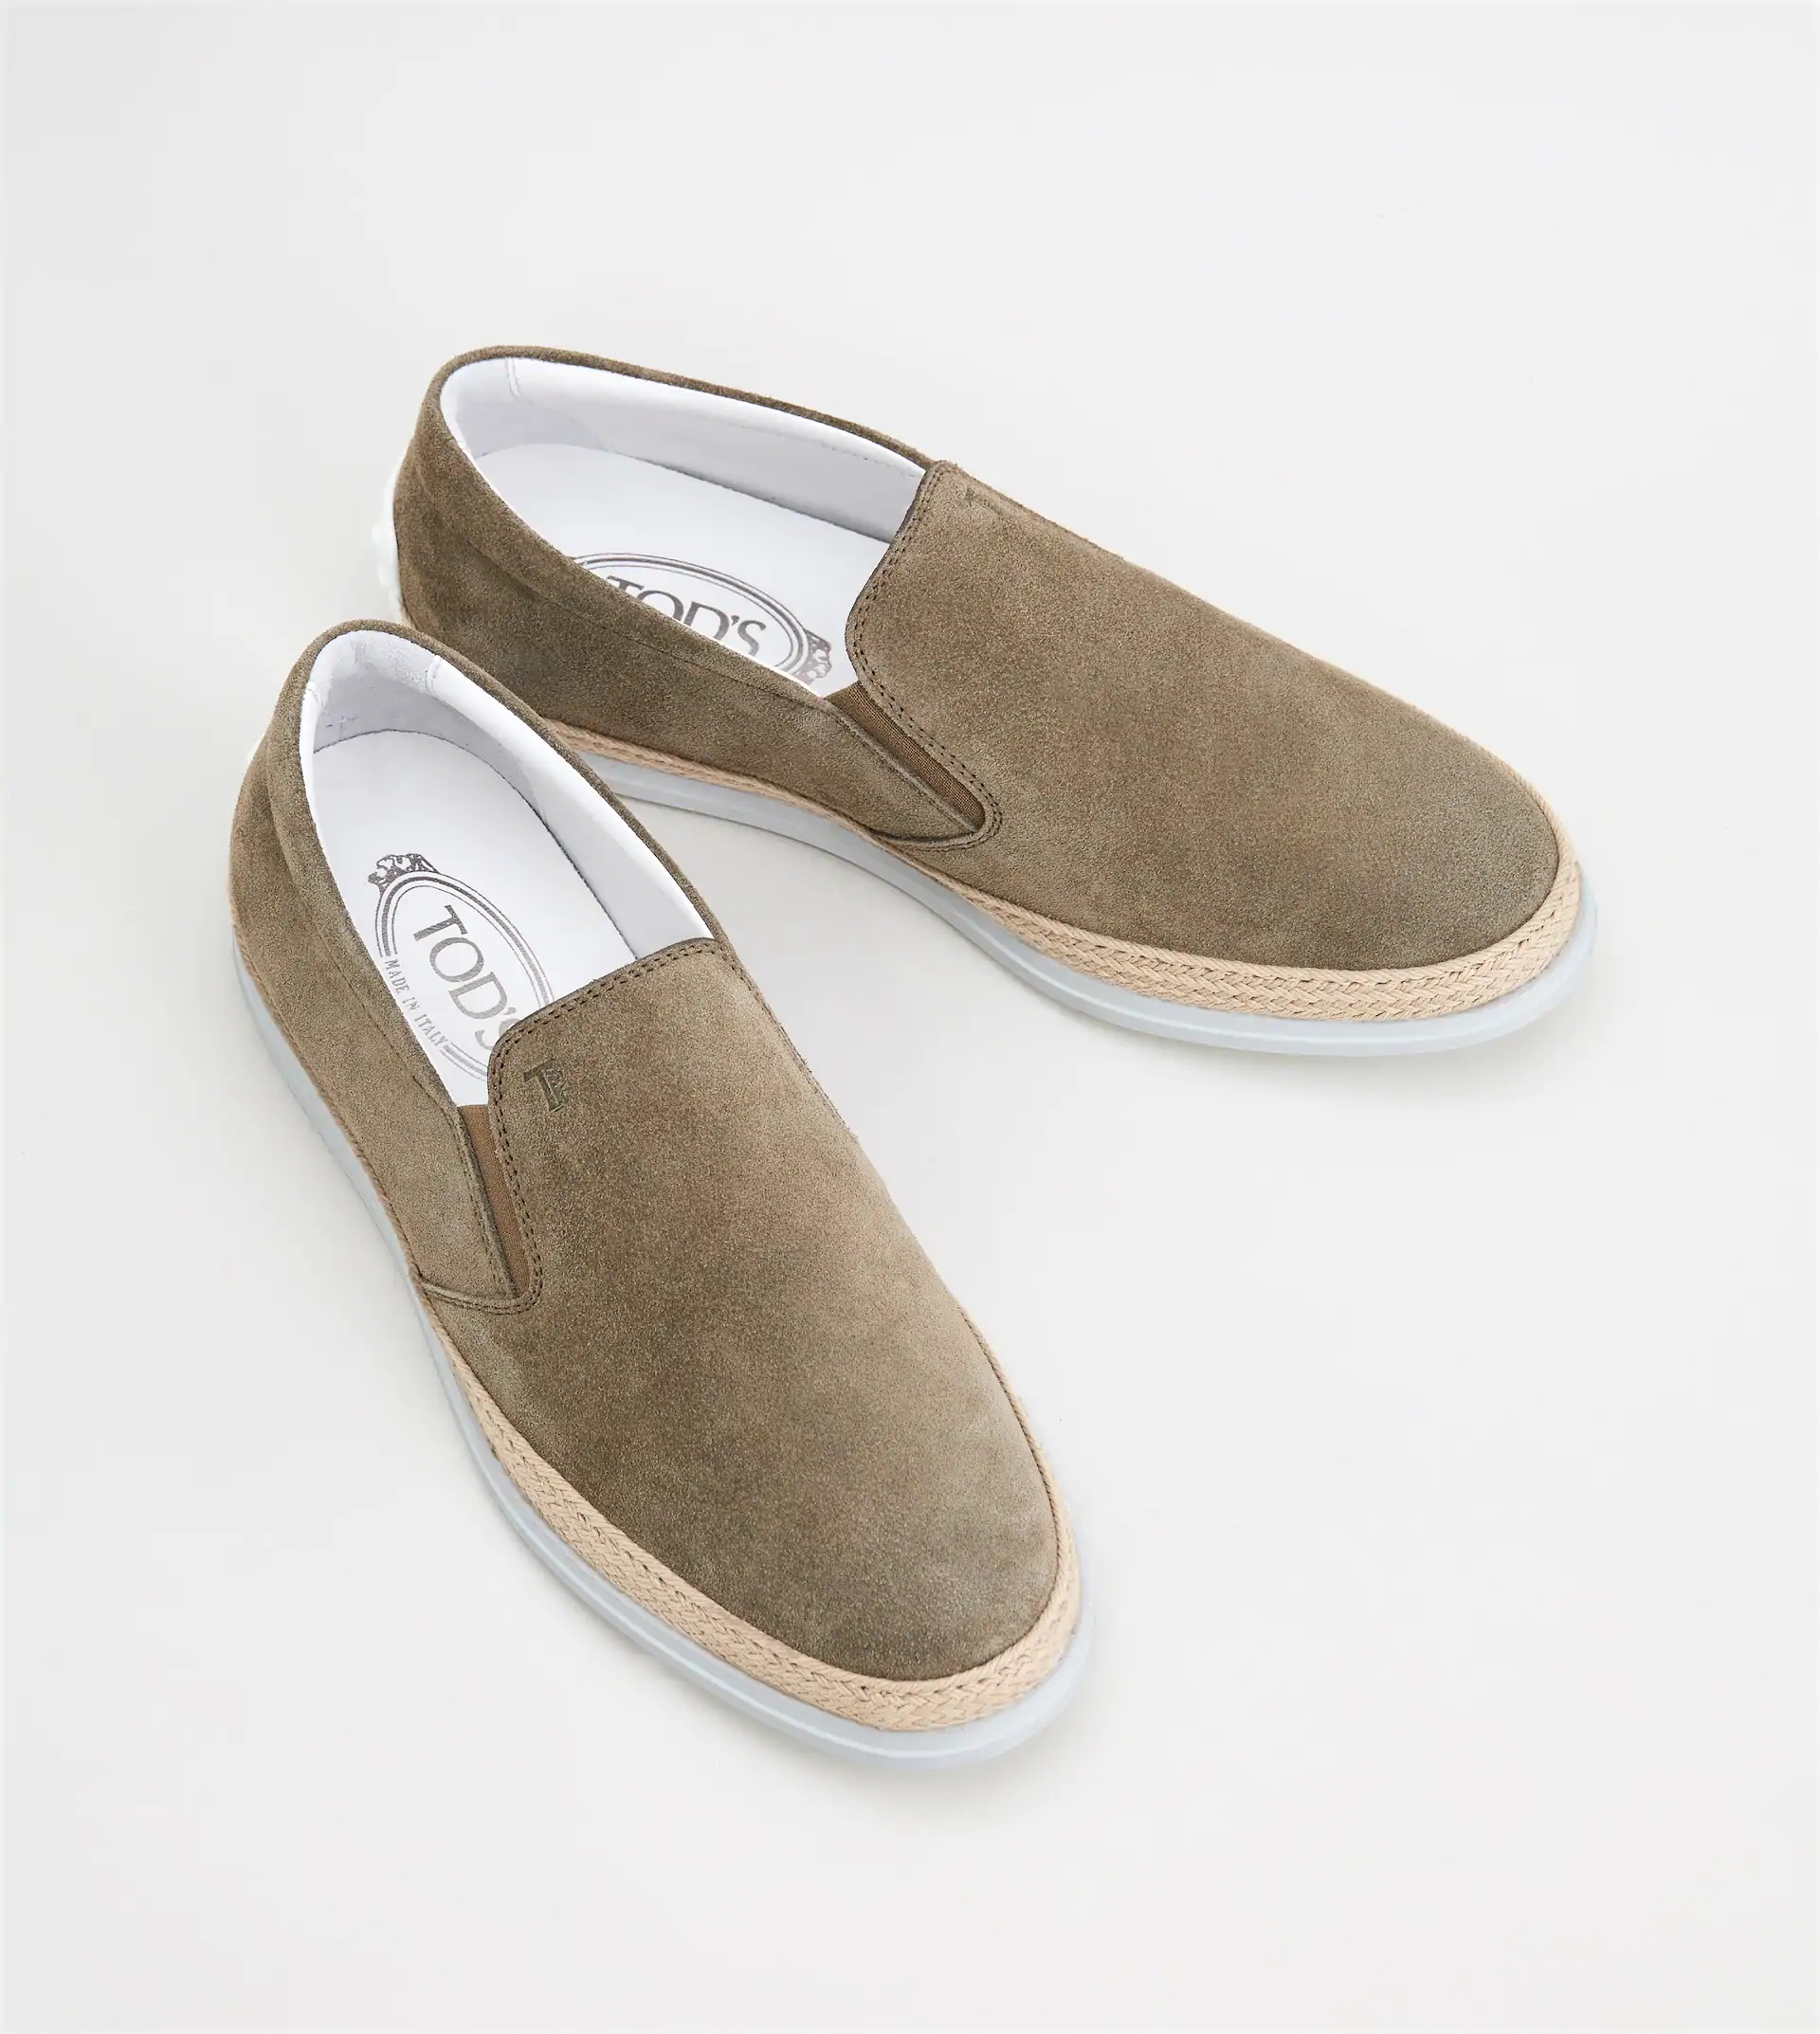 SLIP-ON SHOES IN SUEDE - BROWN - 2